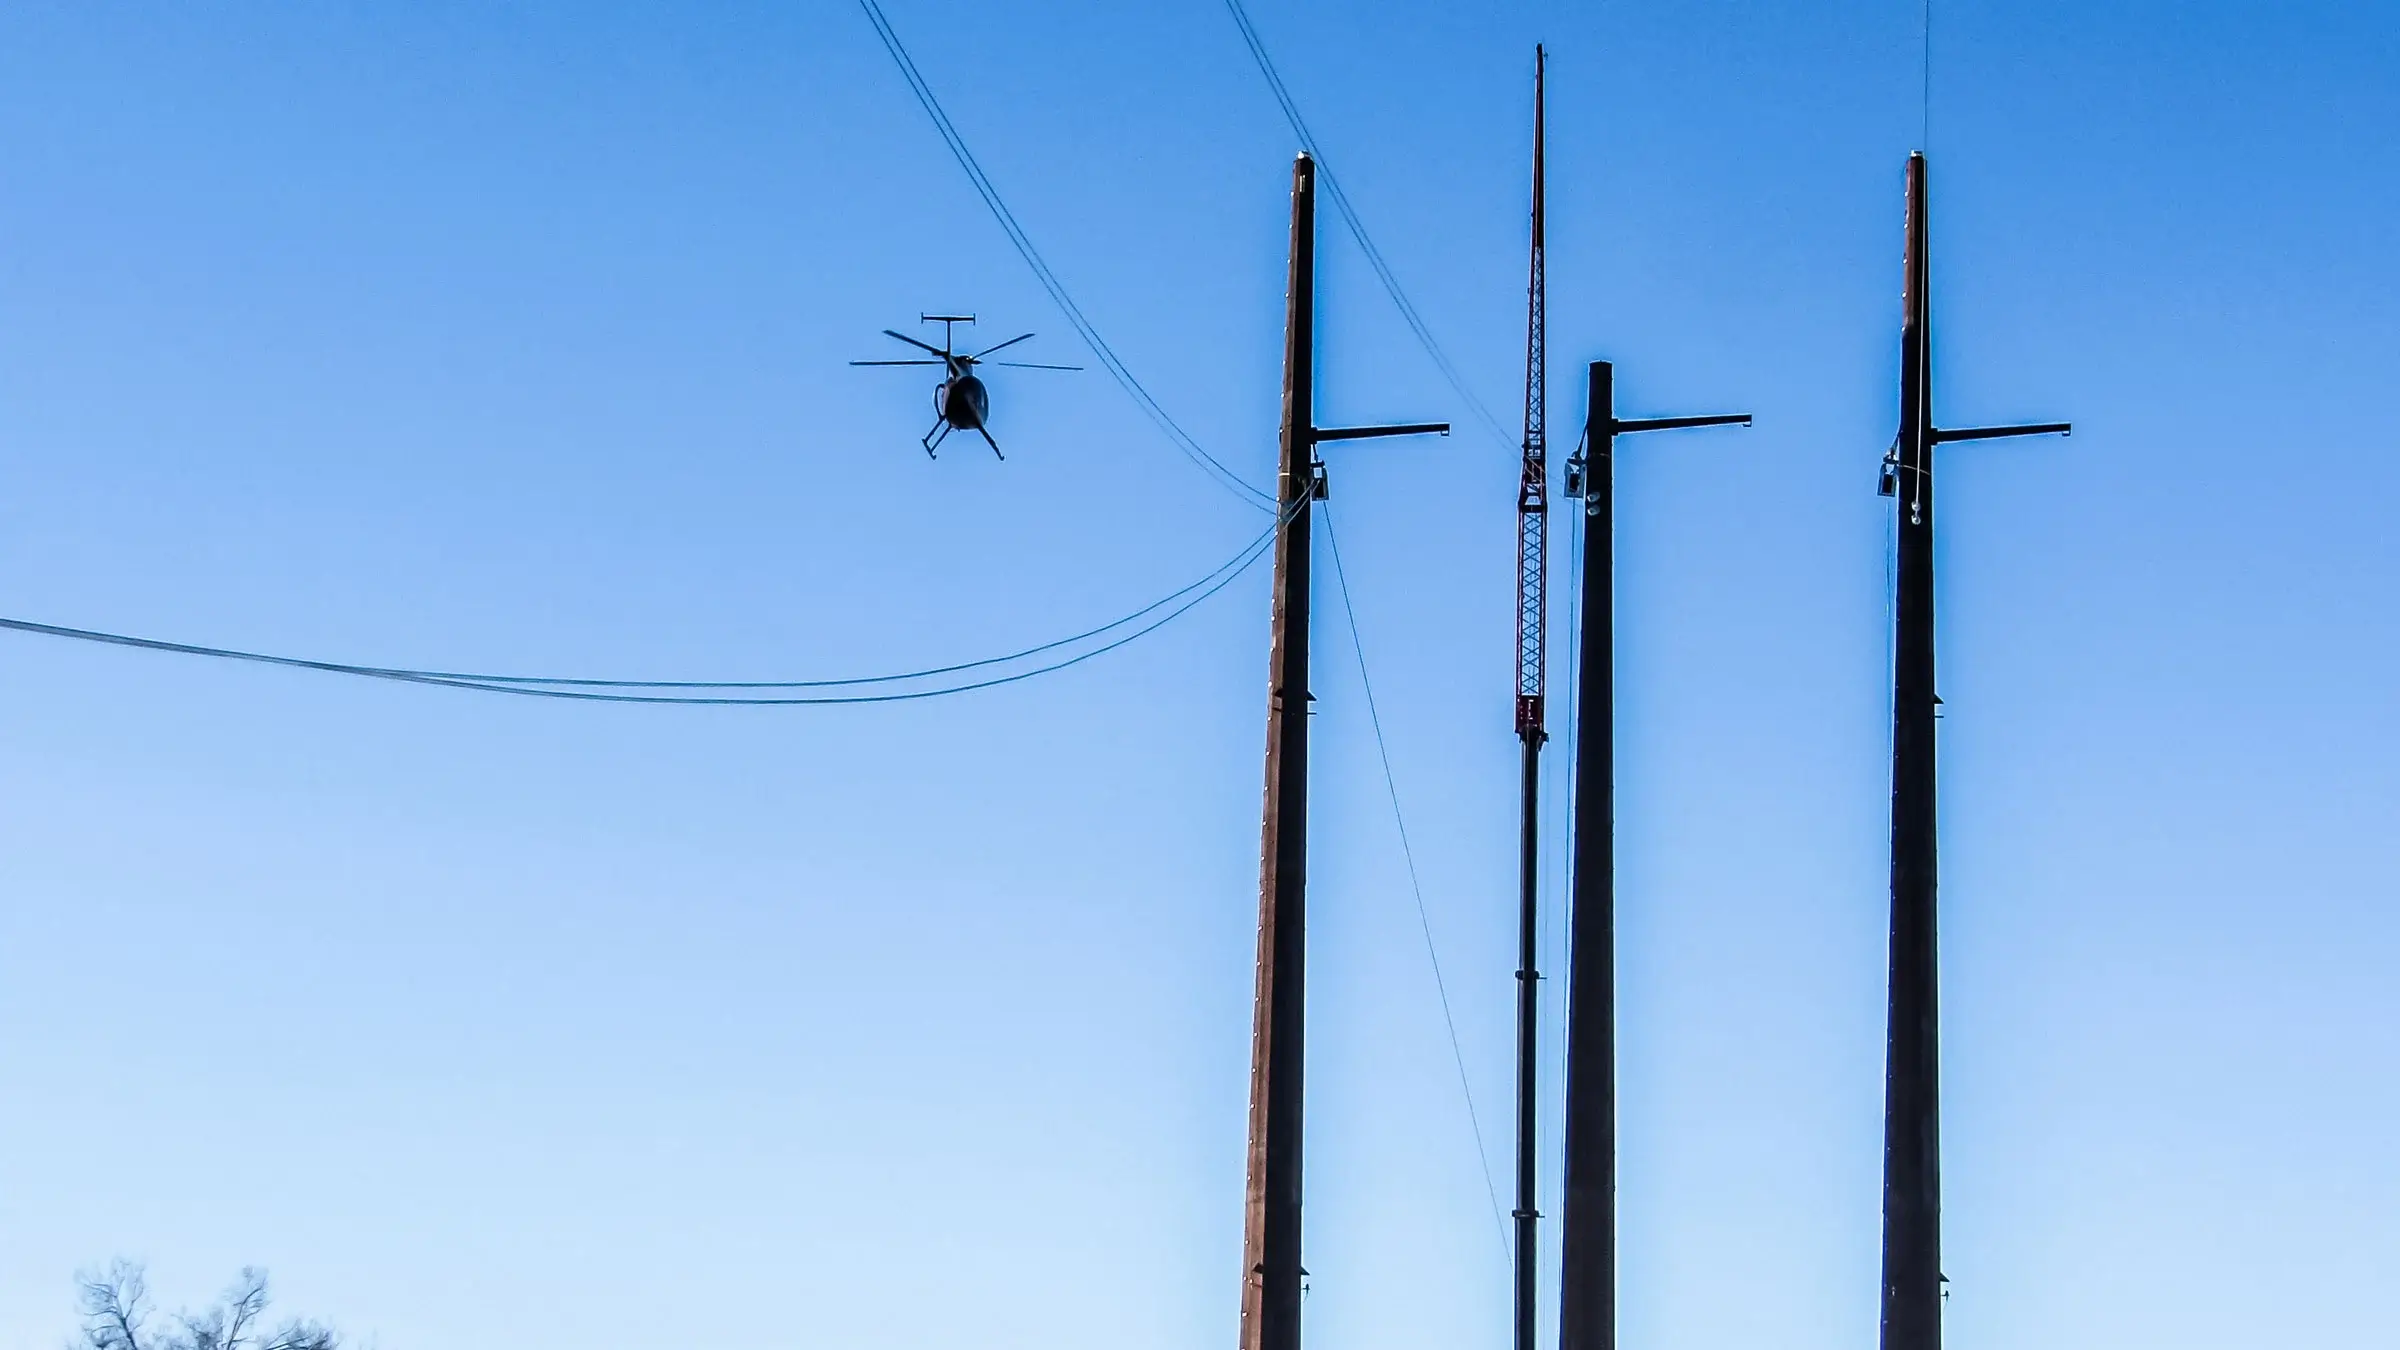 Helicopter flies over power poles and lines to check on them